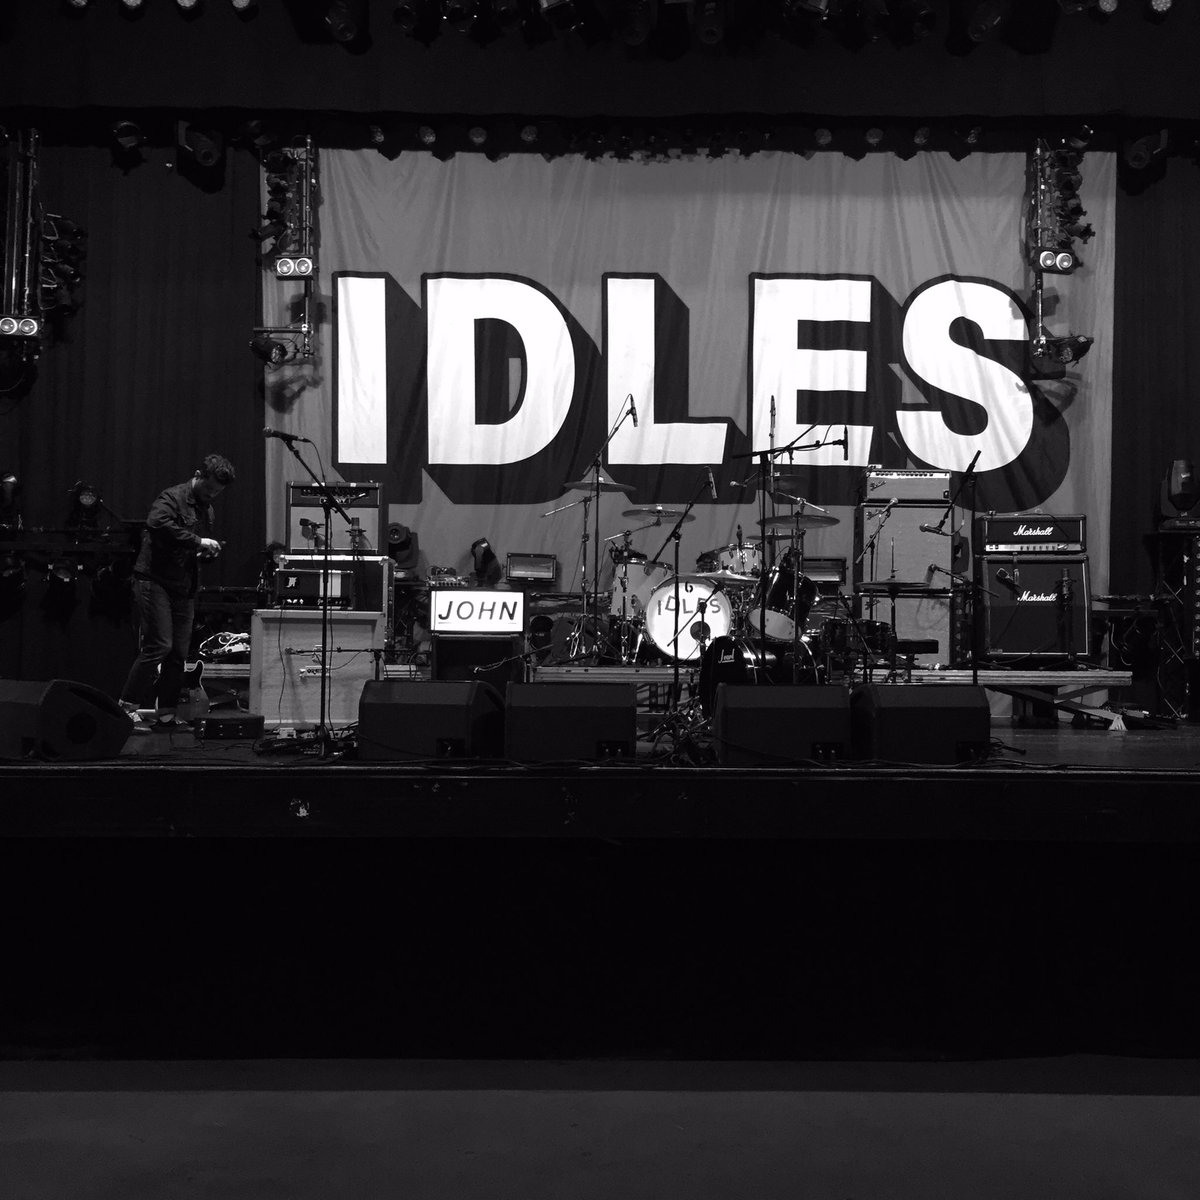 For those who were under rocks yesterday, this face-off happens again... we join our good friends @idlesband at @TheWyldes, Cornwall on SUNDAY 21ST JULY. Here's a snap from our month long EU journey together in 2018 (@Botanique, Brussels) TICKETS >>> thewyldescornwall.com/tickets/idles